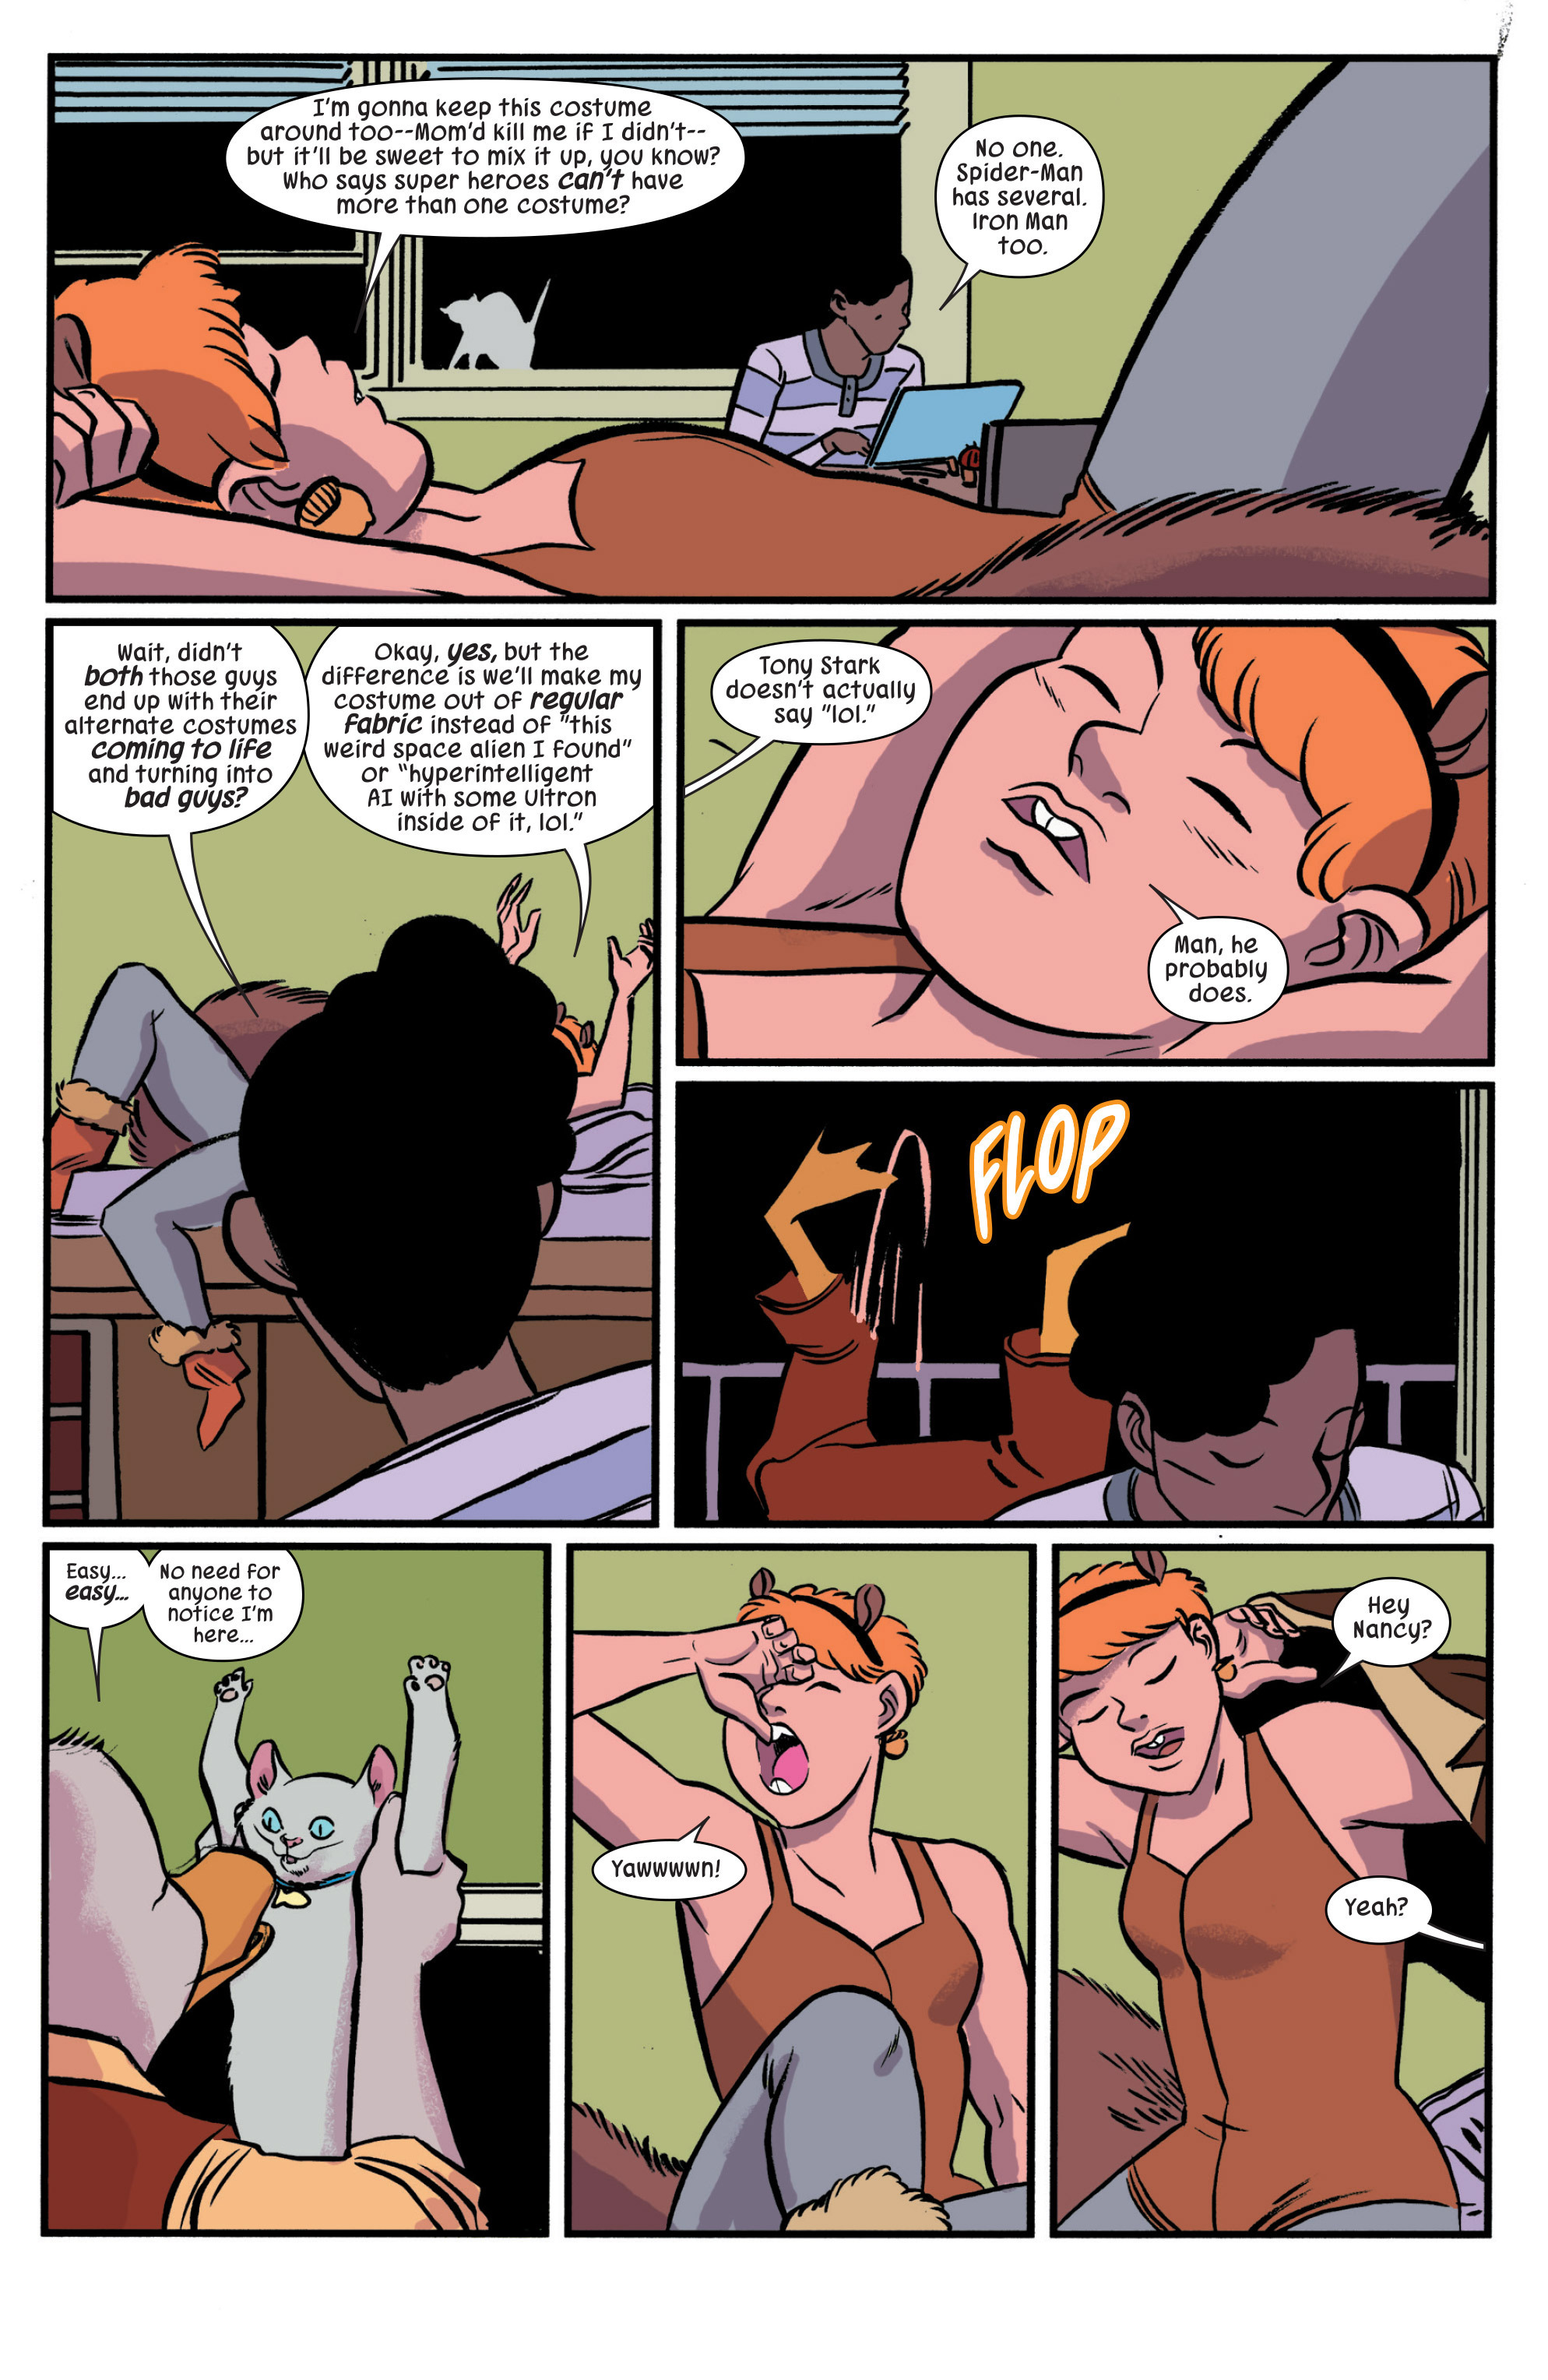 The Unbeatable Squirrel Girl Vol. 2 (2015): Chapter 6 - Page 4